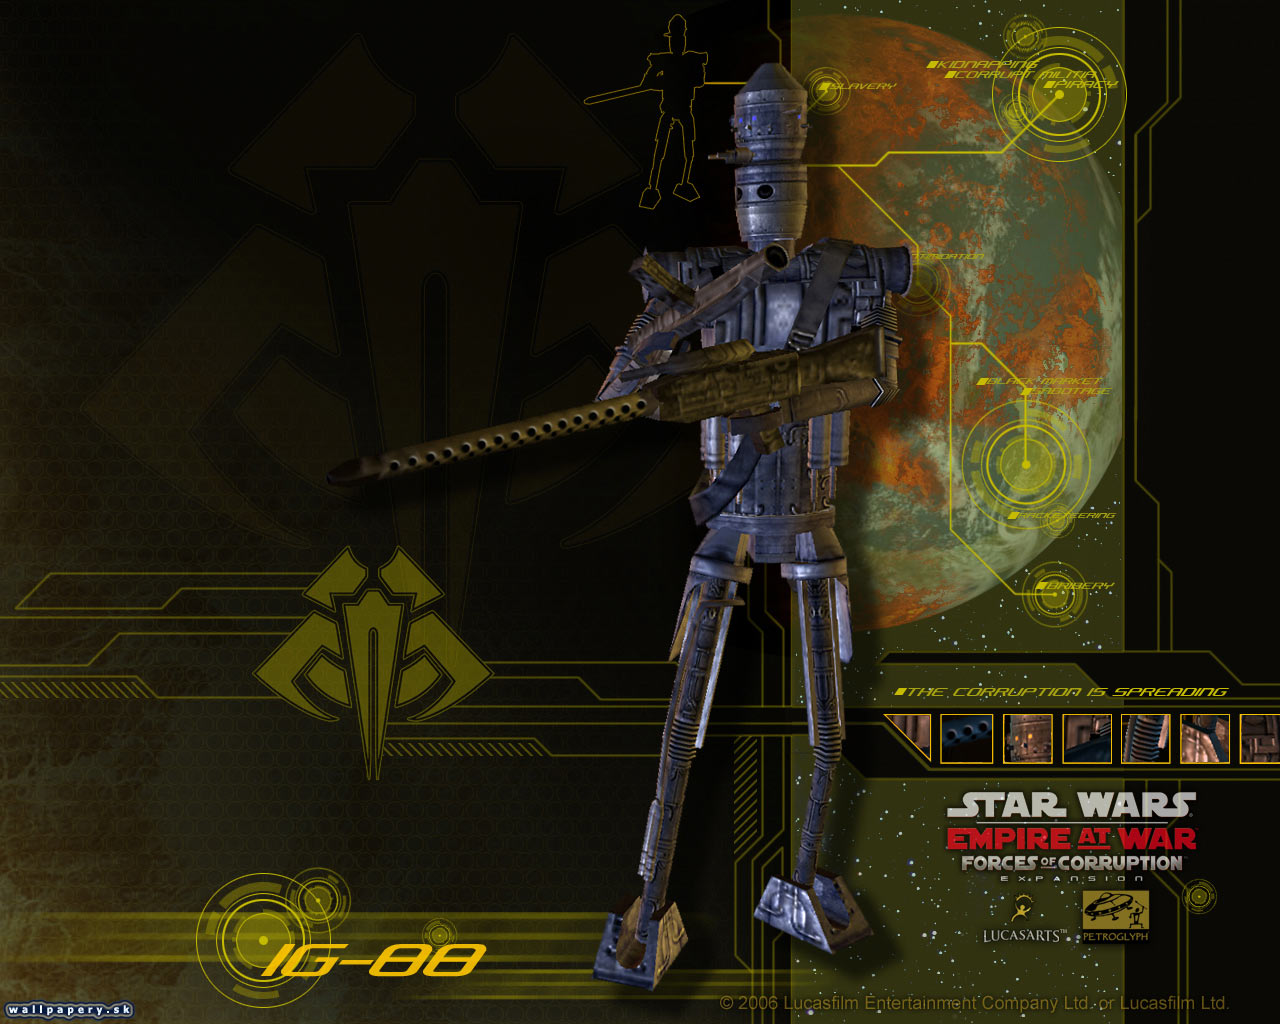 Star Wars: Empire At War - Forces of Corruption - wallpaper 11